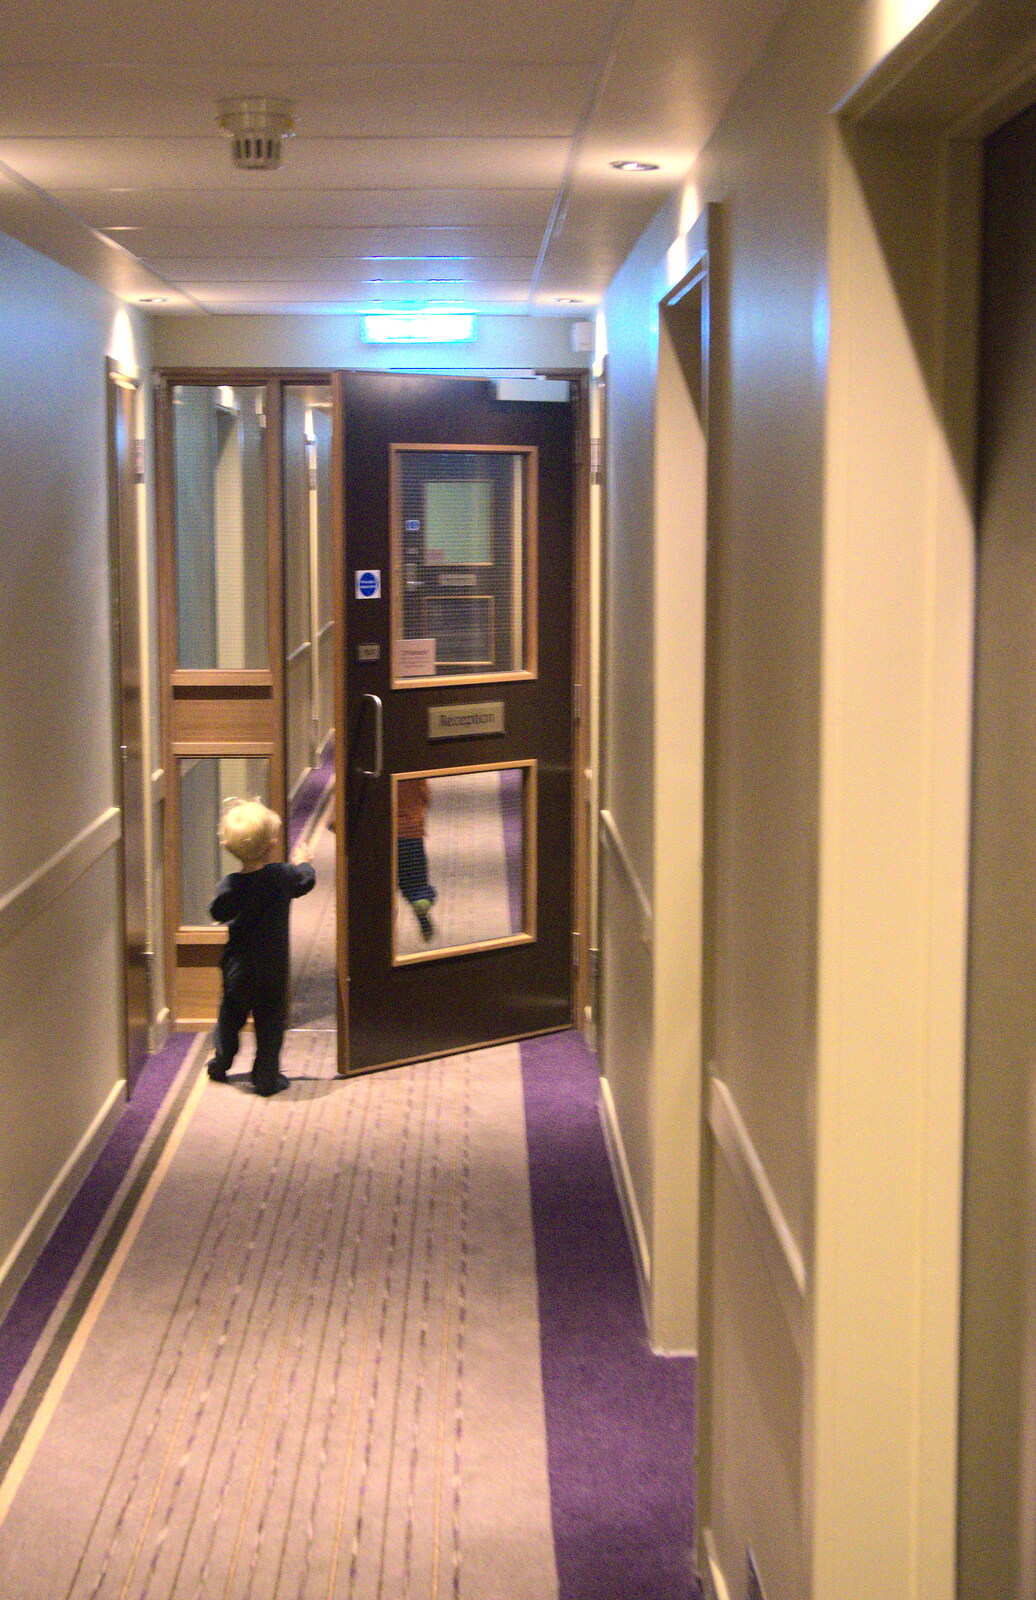 Fred and Harry run off down the corridor from A Few Days in Spreyton, Devon - 26th October 2013